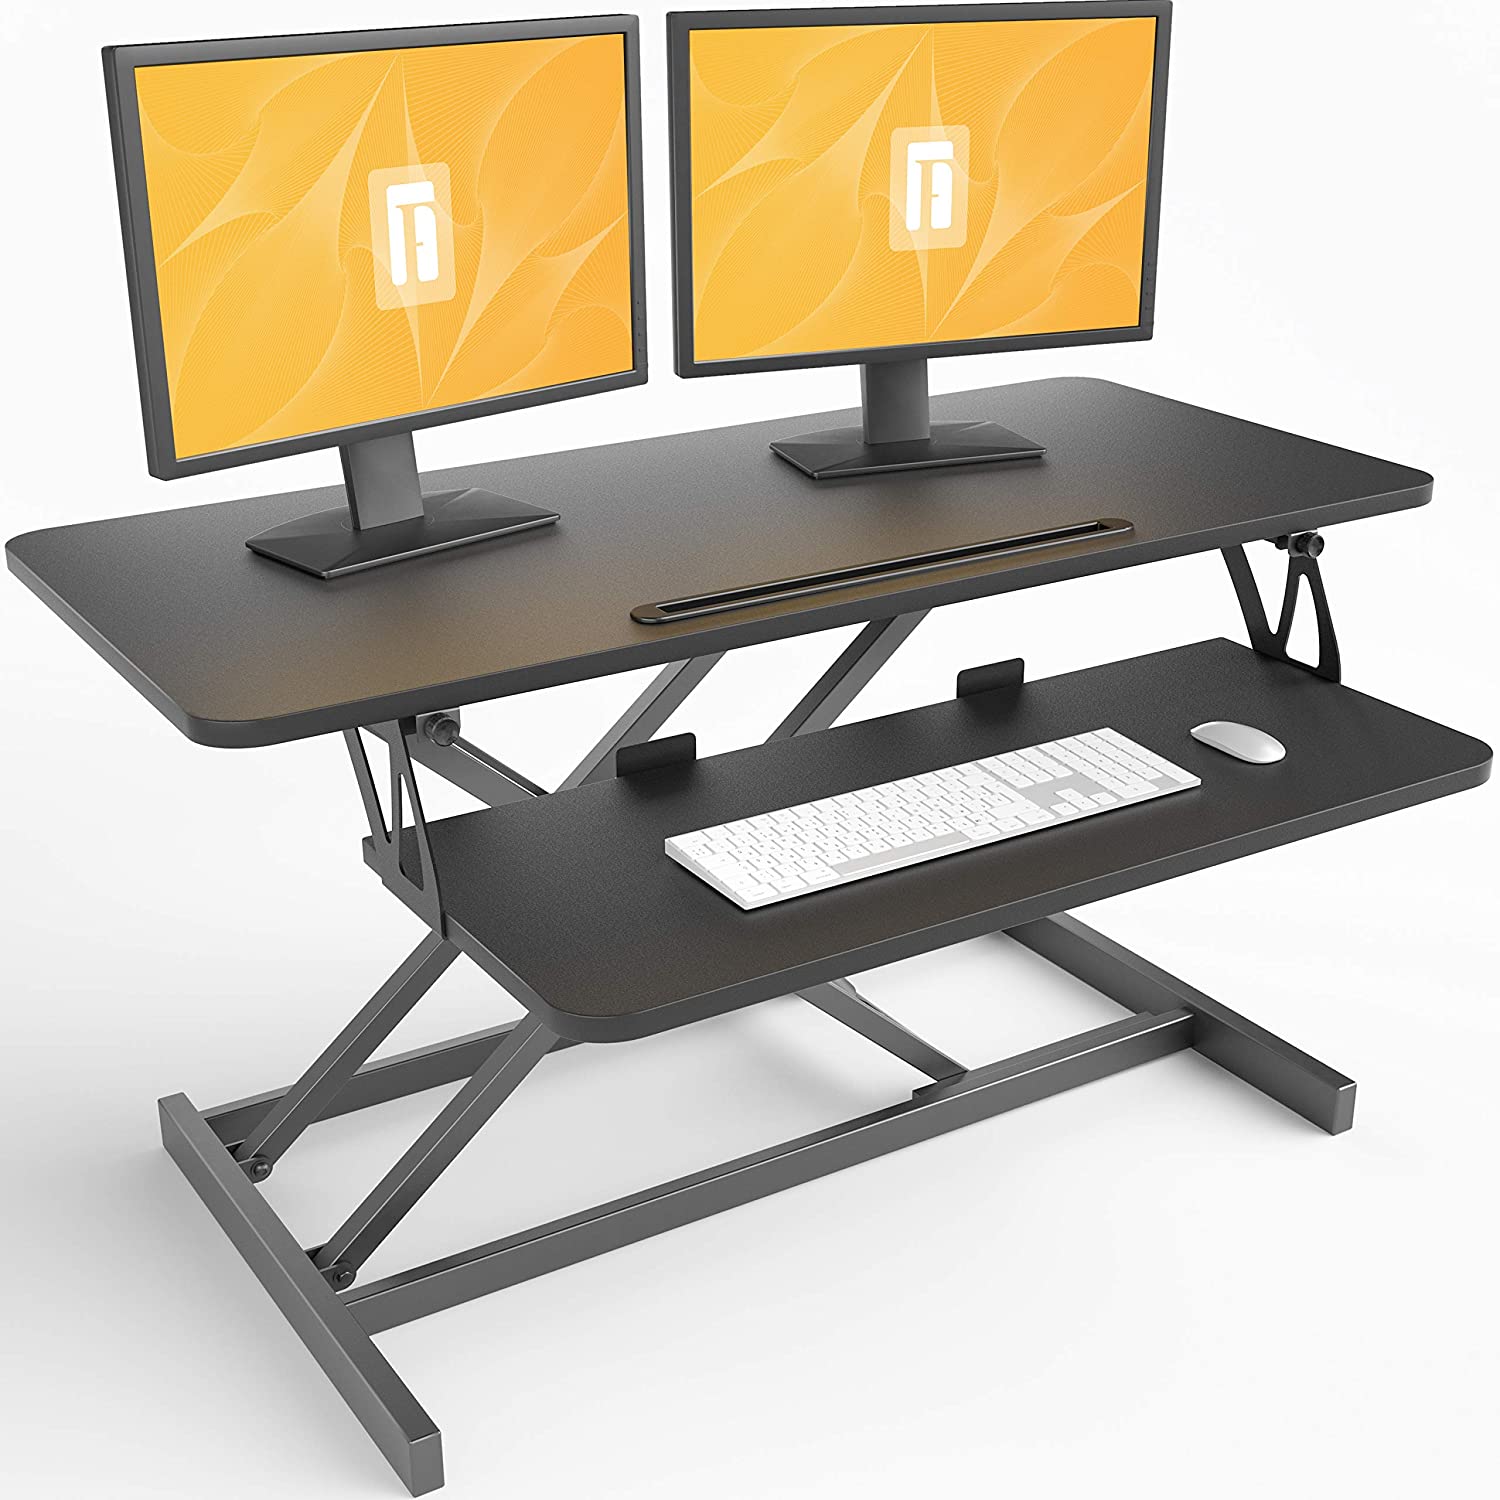 Review of FEZIBO Standing Desk Converter 36 inches Sit Stand Desk Riser